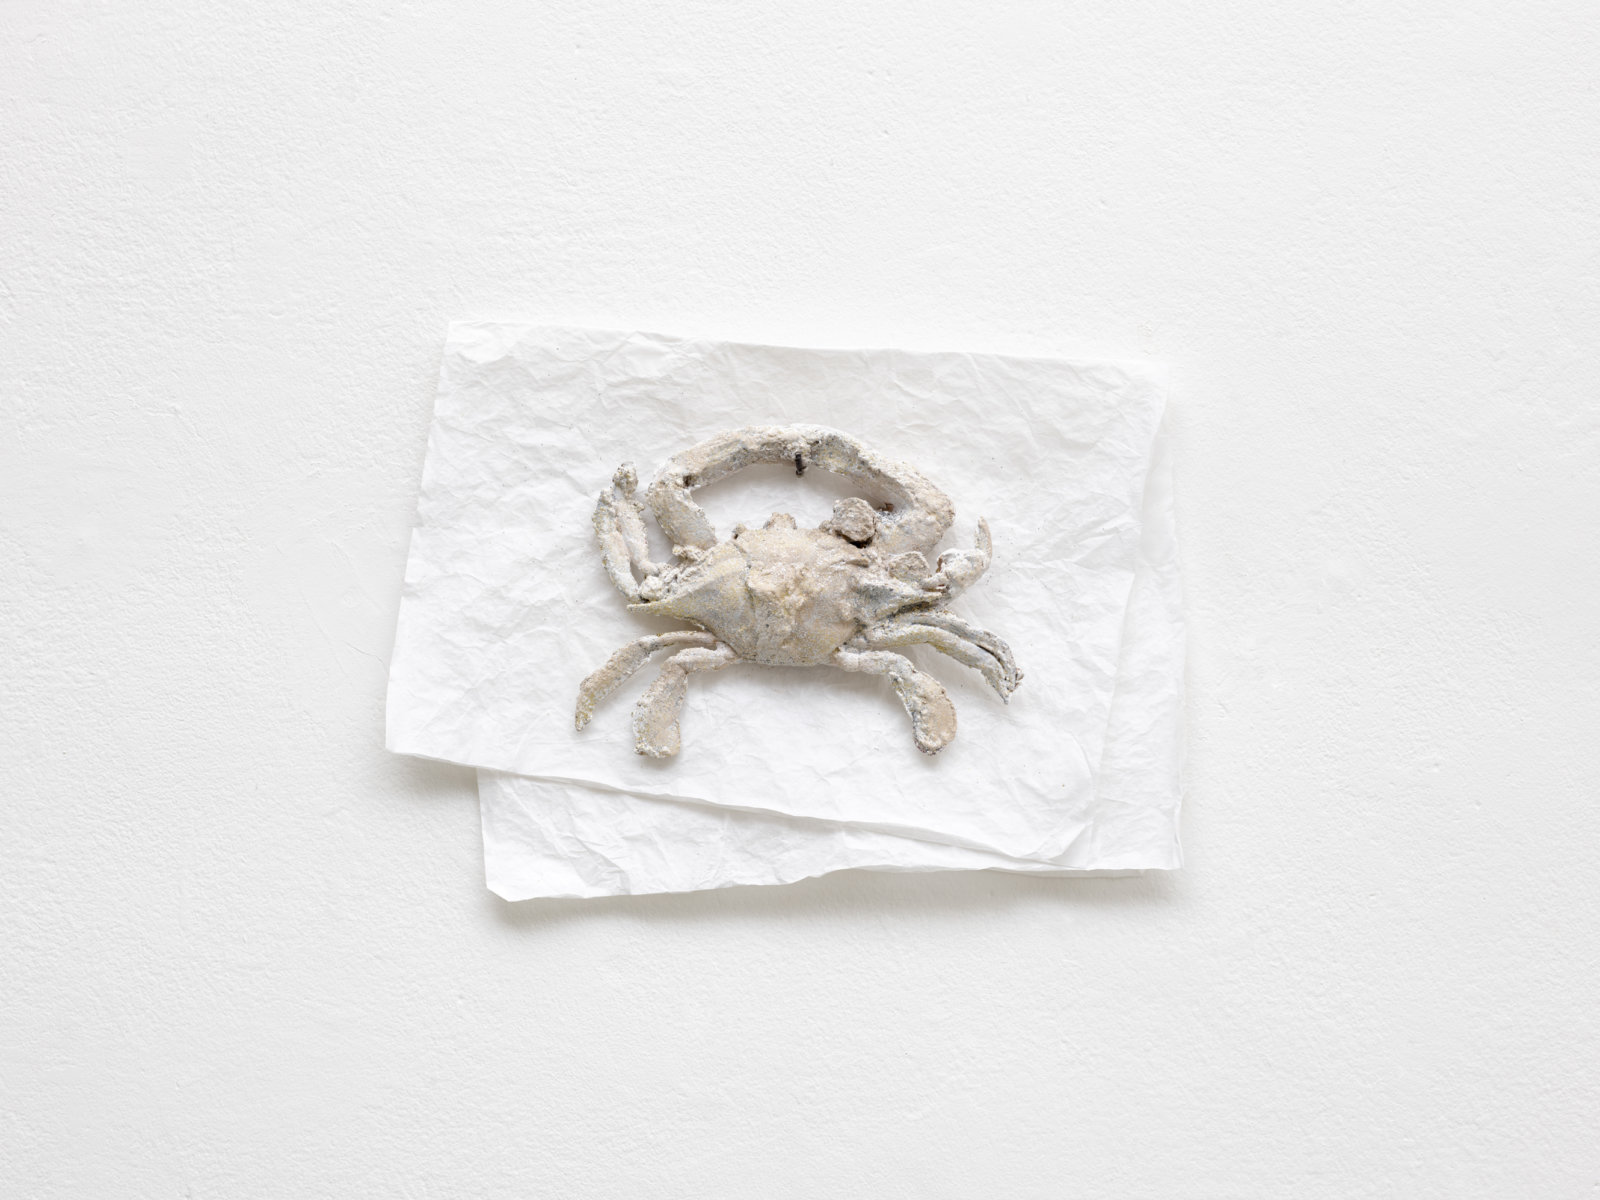 Rochelle Goldberg, Tiny protective universe, 2022, plastic crab, tissue paper, acrylic paint, gesso, dirt, concrete, polyester glitter, 11 x 15 in. (28 x 39 cm)